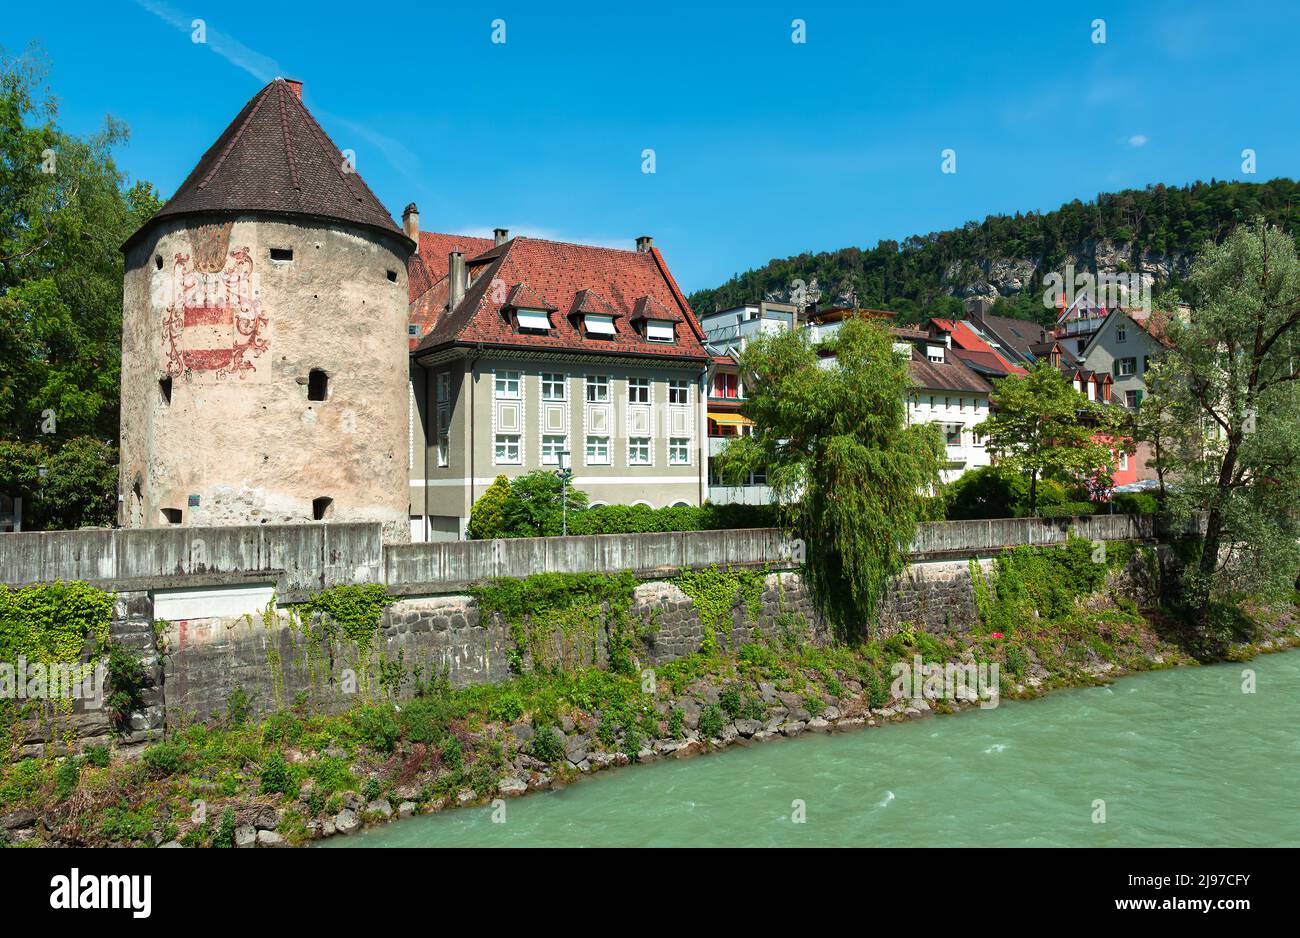 Feldkirch, Austria - May 20, 2022: View of the old town of Feldkirch with the water tower on the banks of the river Ill Stock Photo